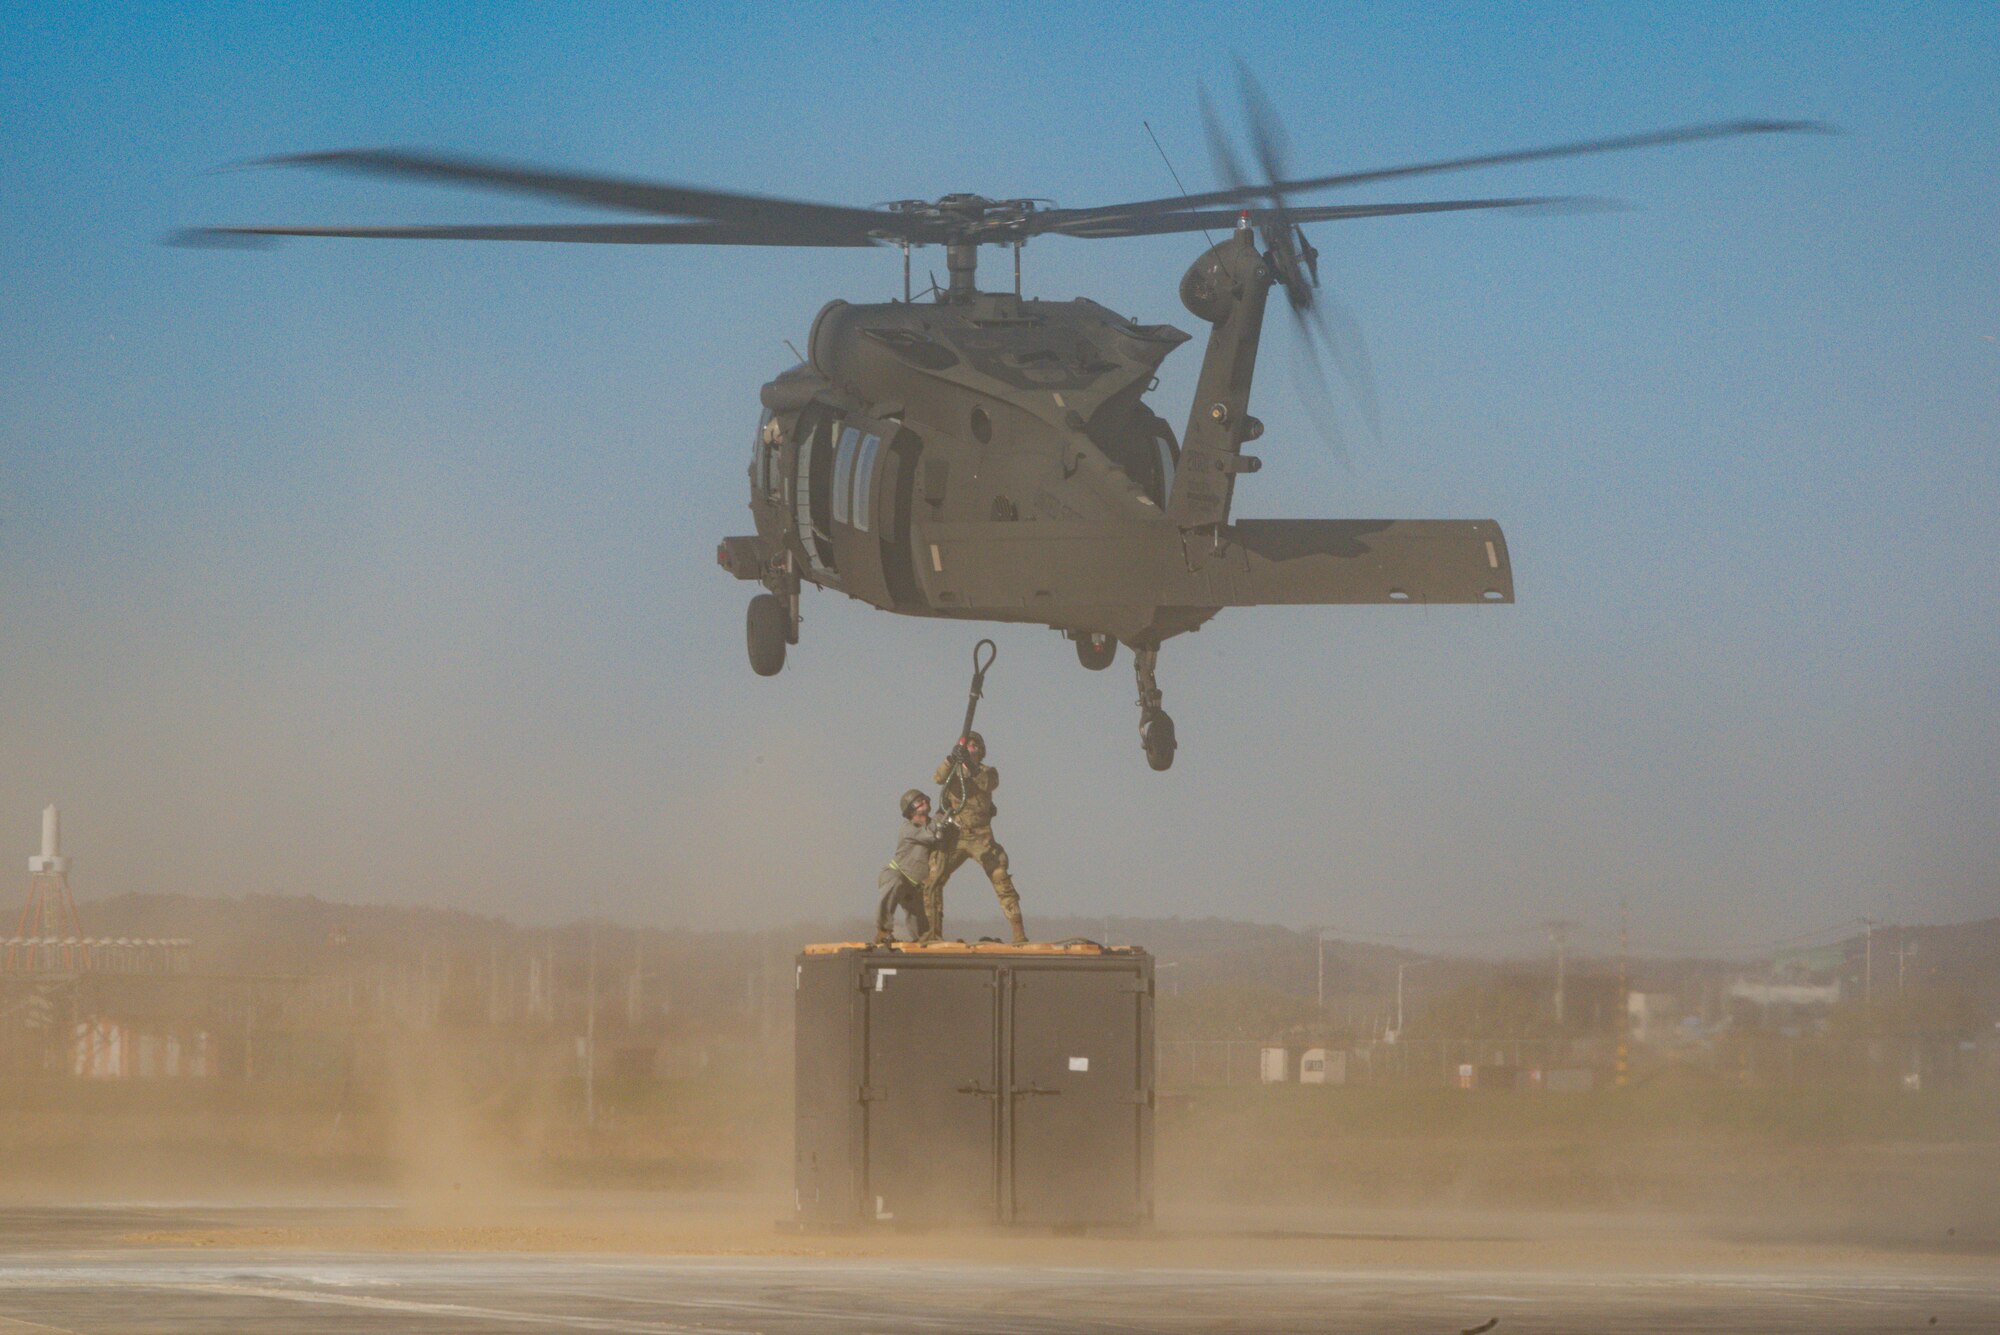 U.S. Air Force Staff Sgts. William Waymouth, 51st Munitions Squadron munitions management crew chief, and Miles Euro, munitions operations supervisor, hook cargo up to a U.S. Army Black Hawk helicopter during a sling load demonstration at Osan Air Base, Republic of Korea, Nov. 4, 2022.